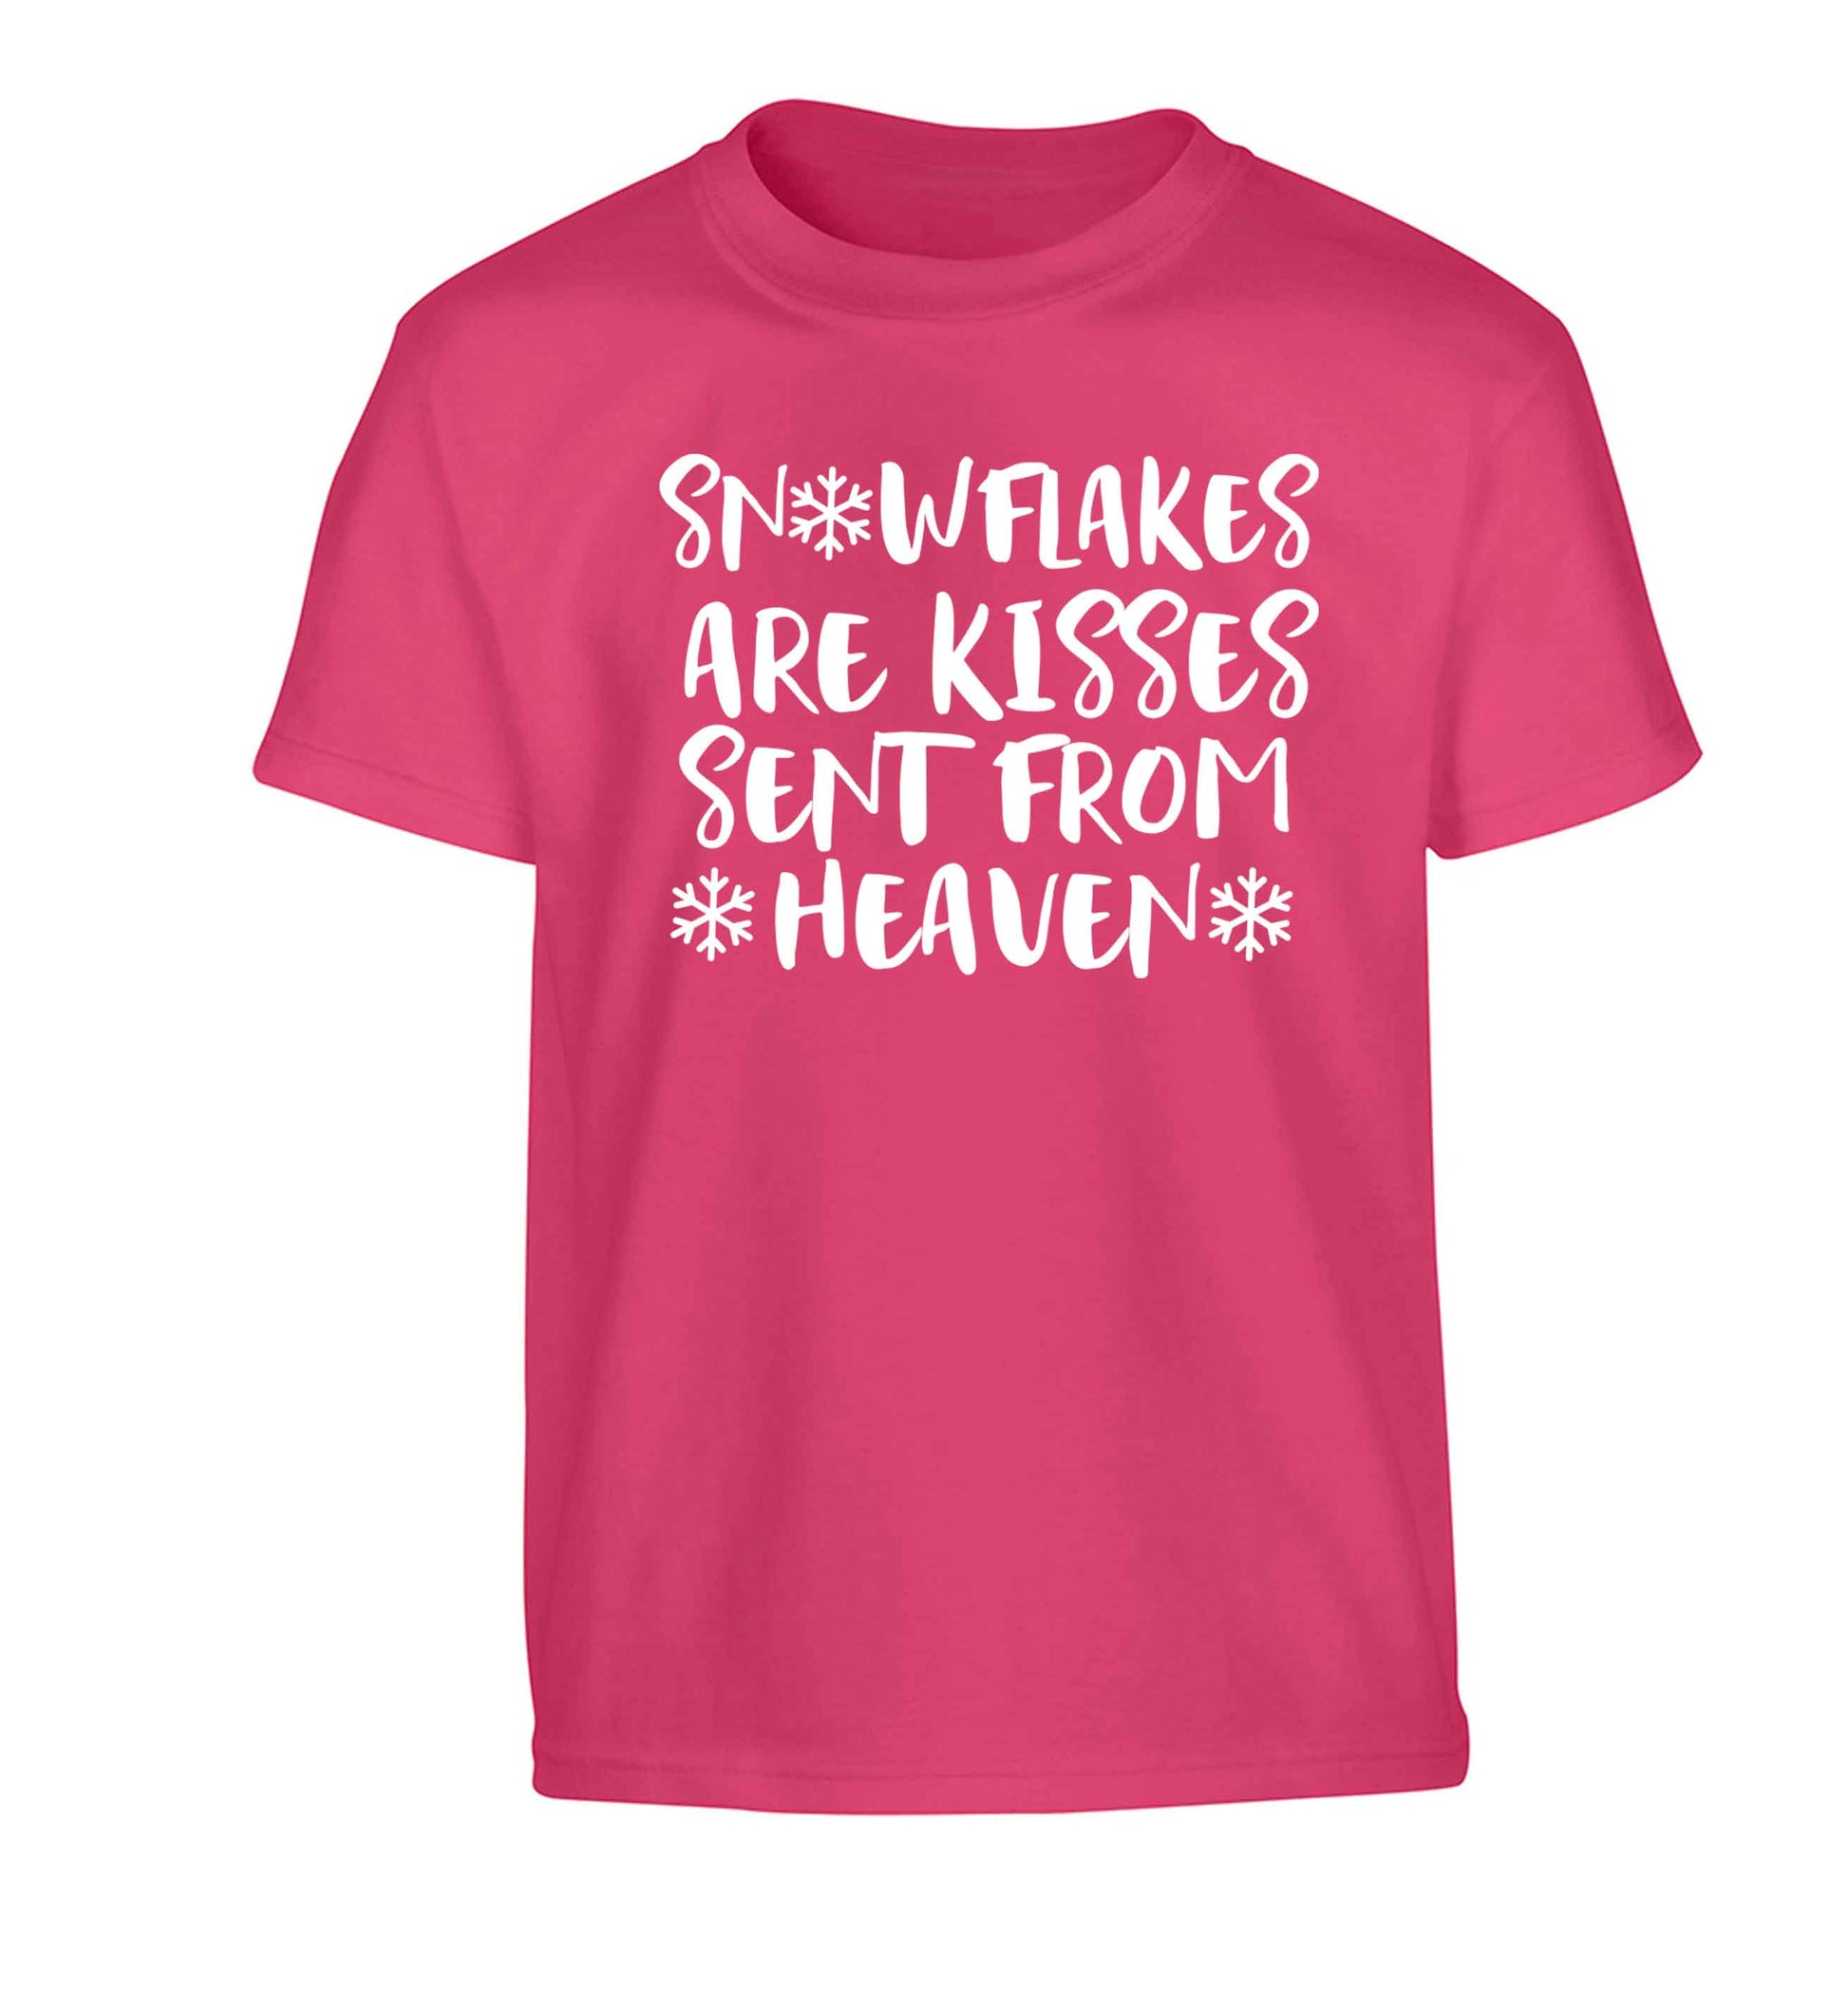 Snowflakes are kisses sent from heaven Children's pink Tshirt 12-13 Years